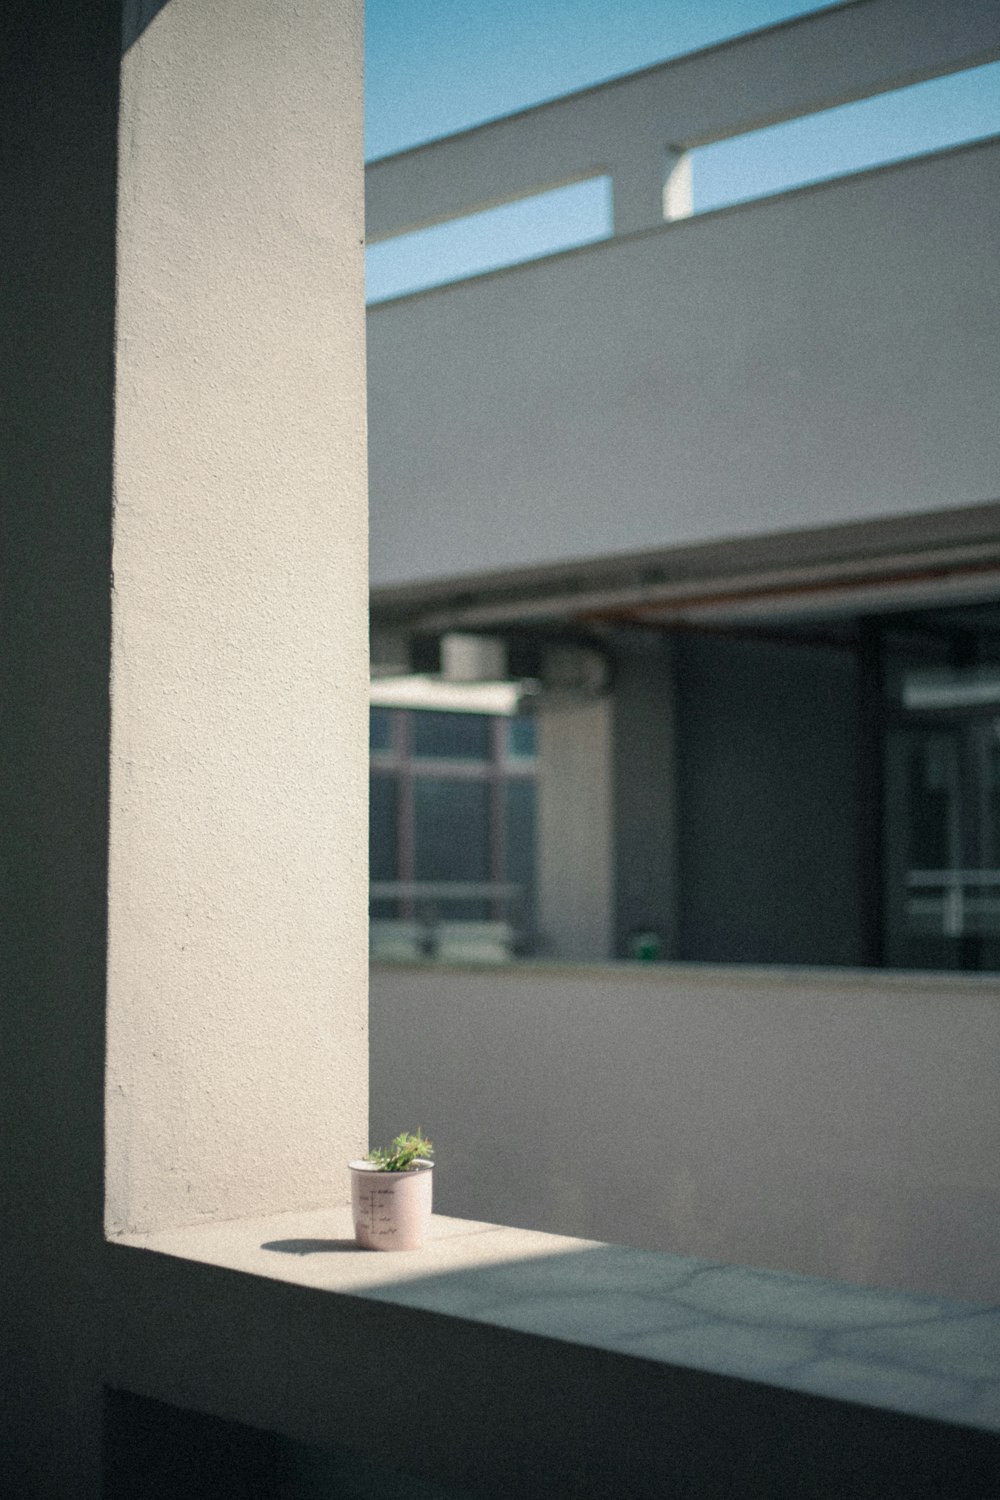 a small potted plant sitting on a ledge